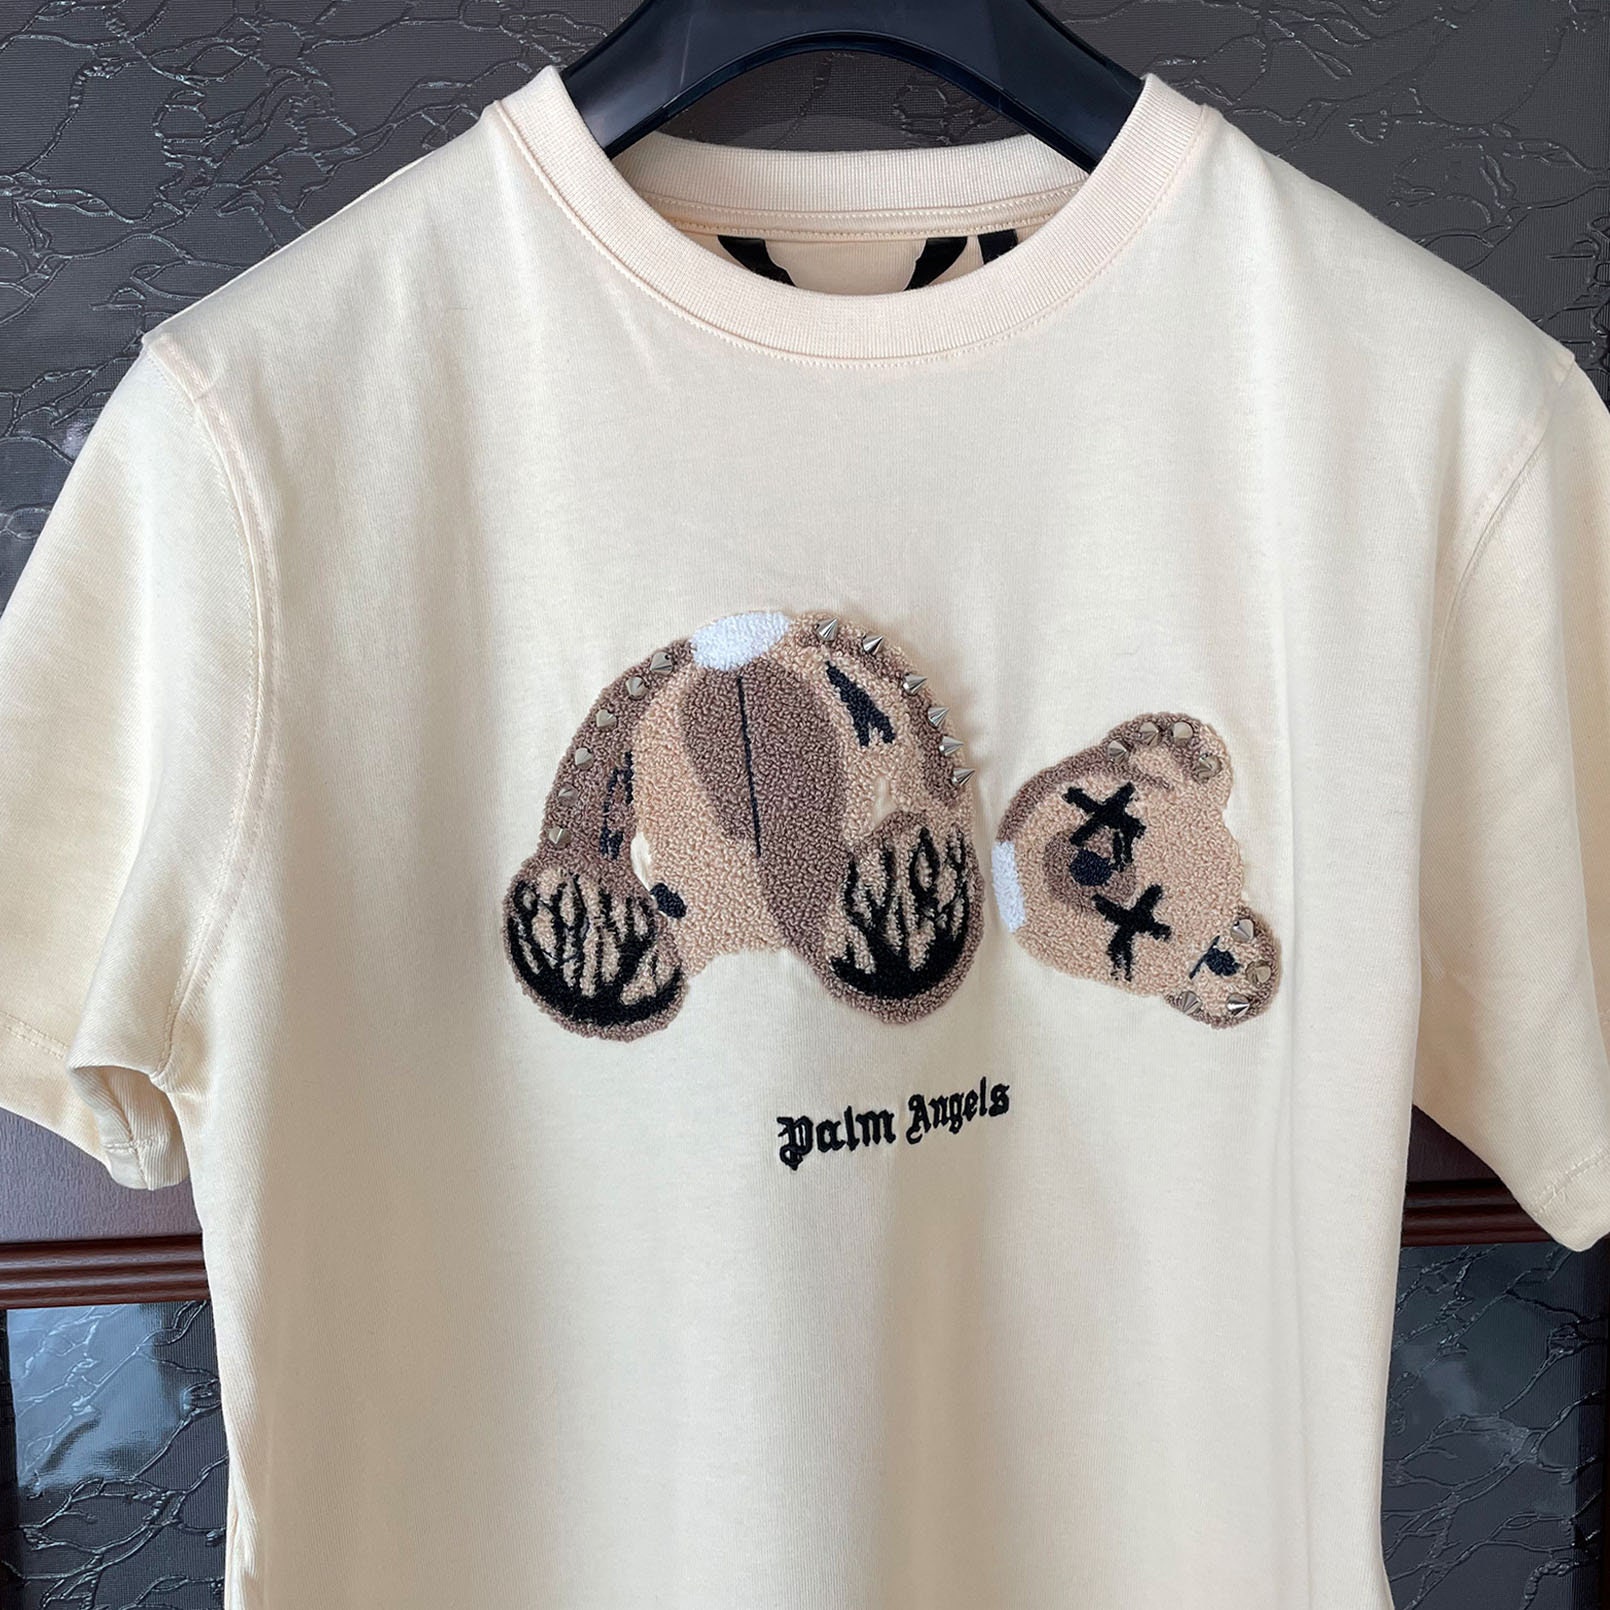 Palm Angels Beige T-shirt With Teddy Bear and Metal Spikes Size 2XL -   Canada